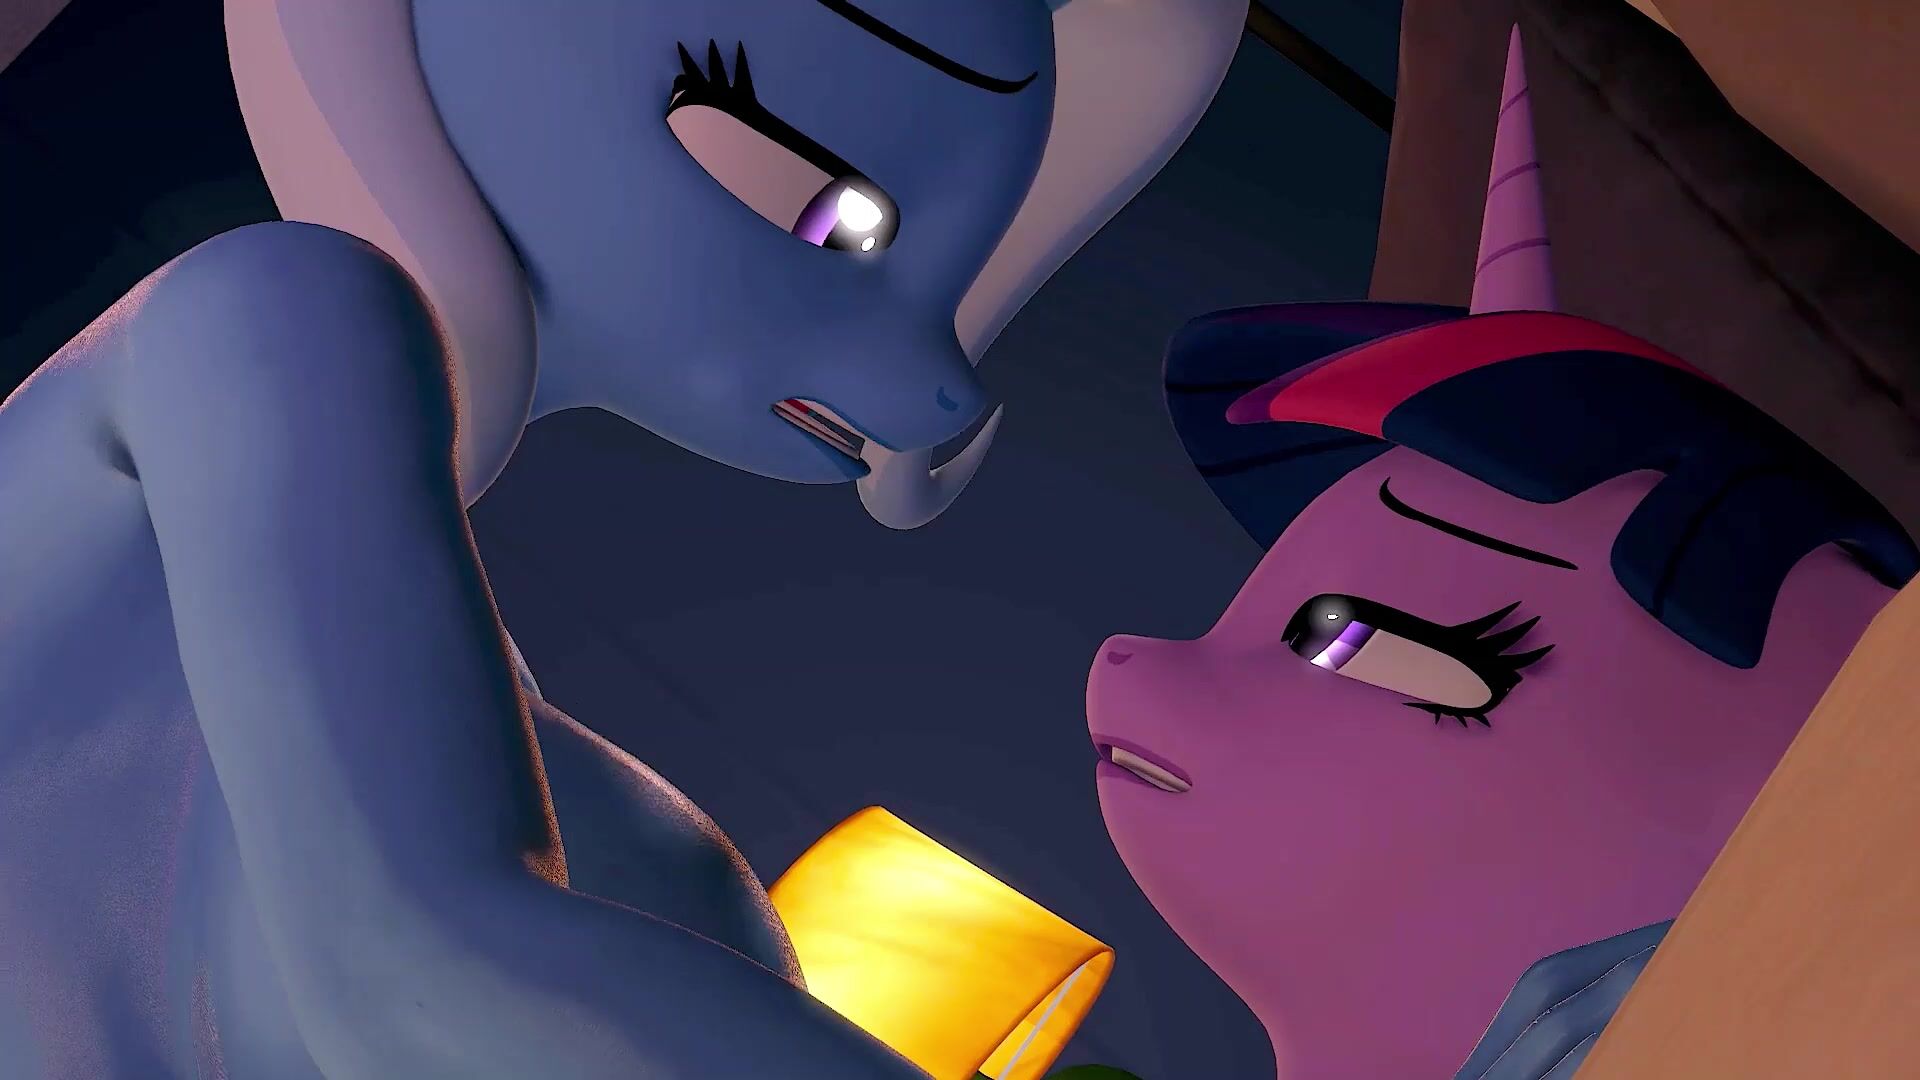 Twilight Sparkle Furry Porn - Twilight Sparkle and Trixie, parts 1 and 2